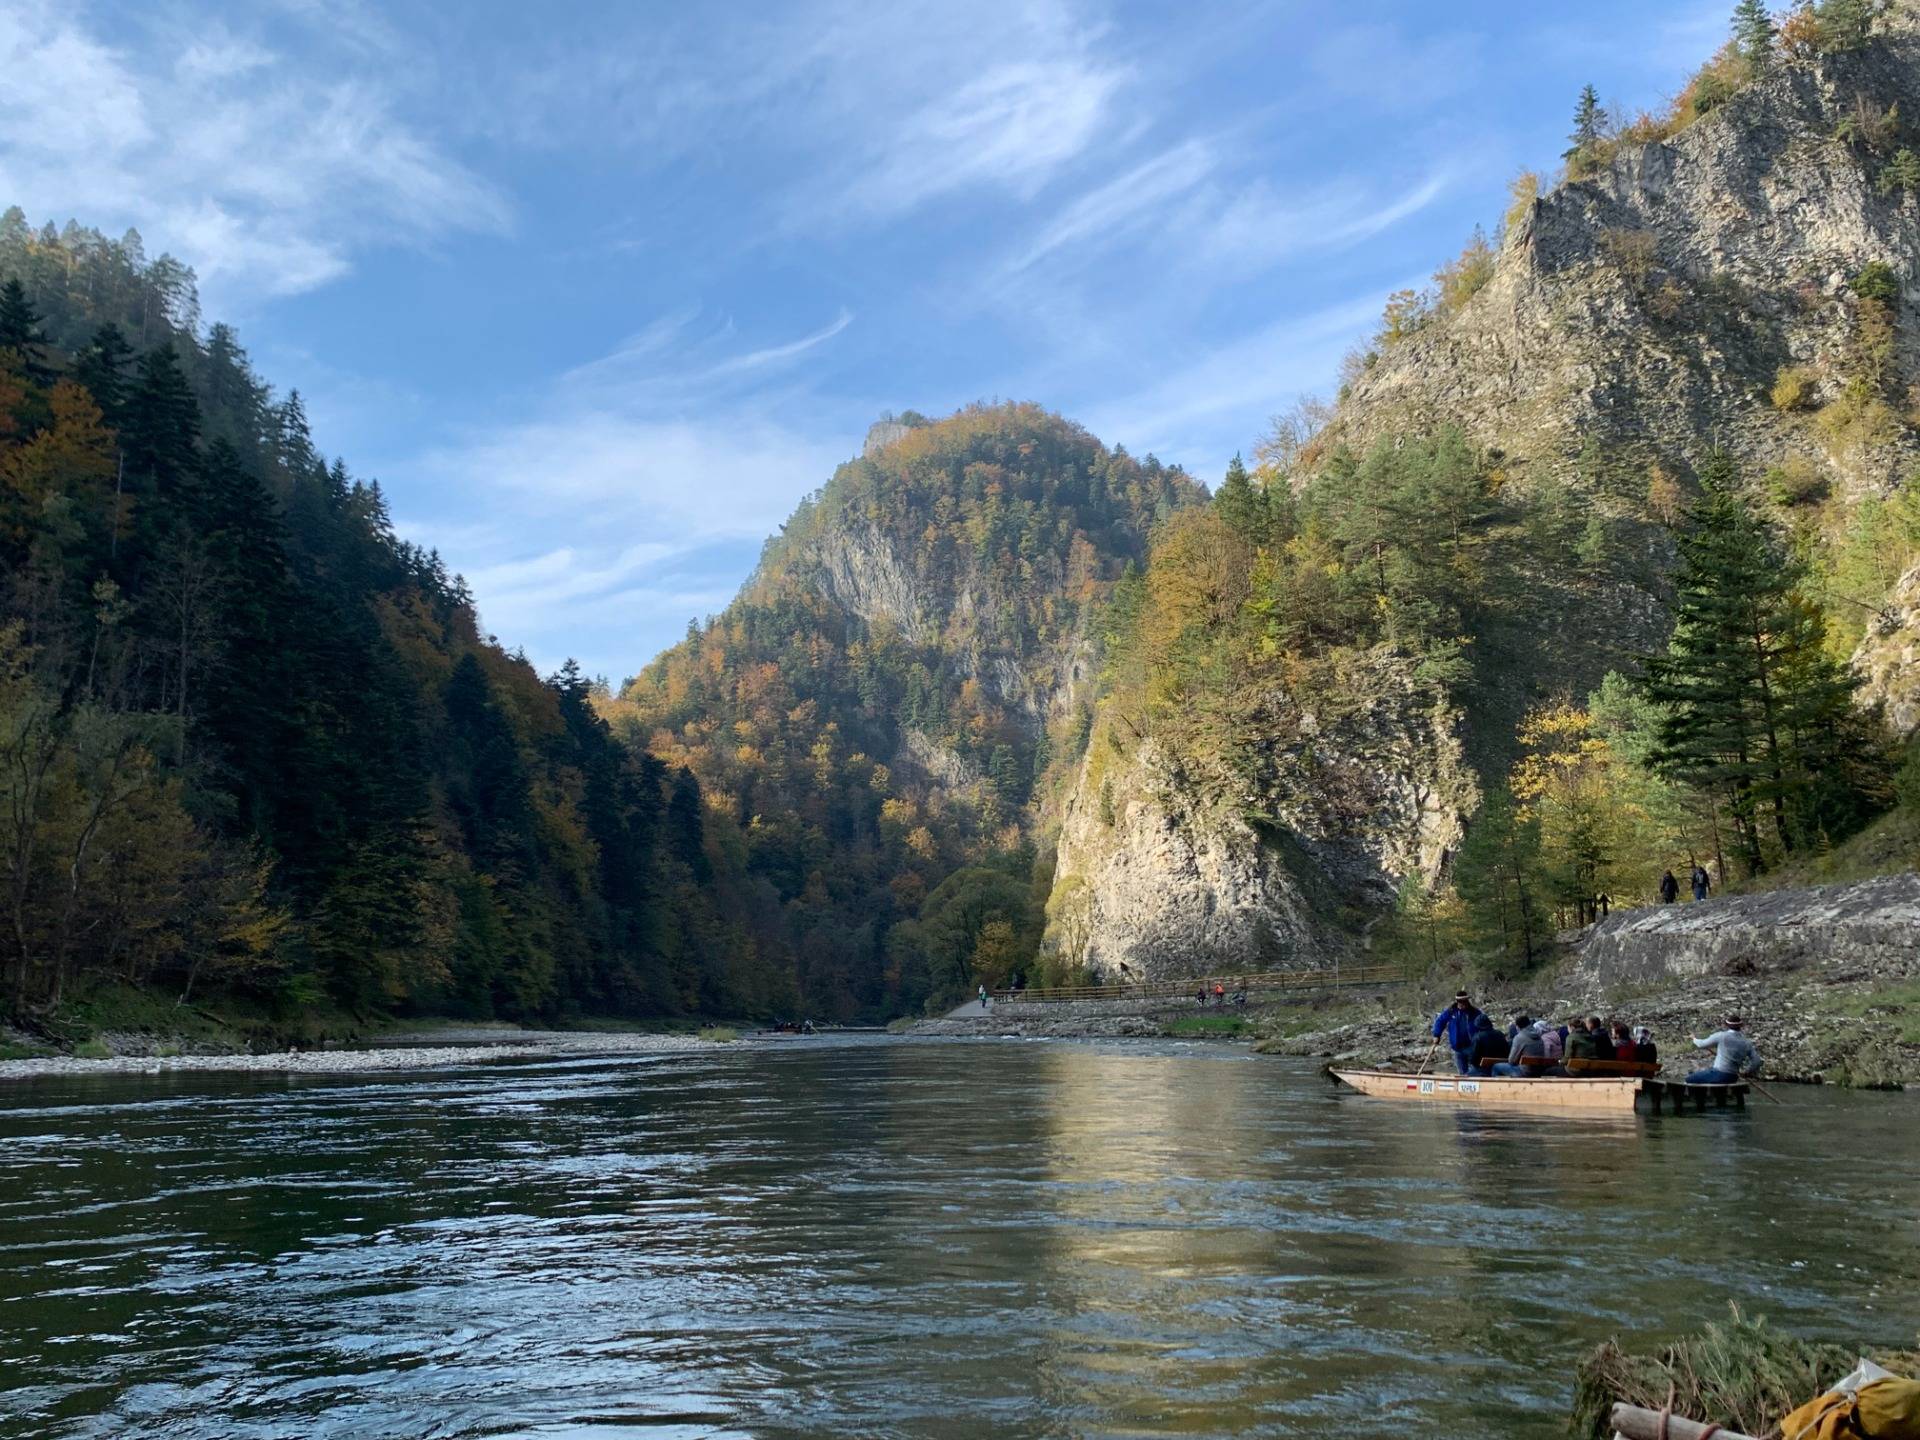 Down the Dunajec River Gorge